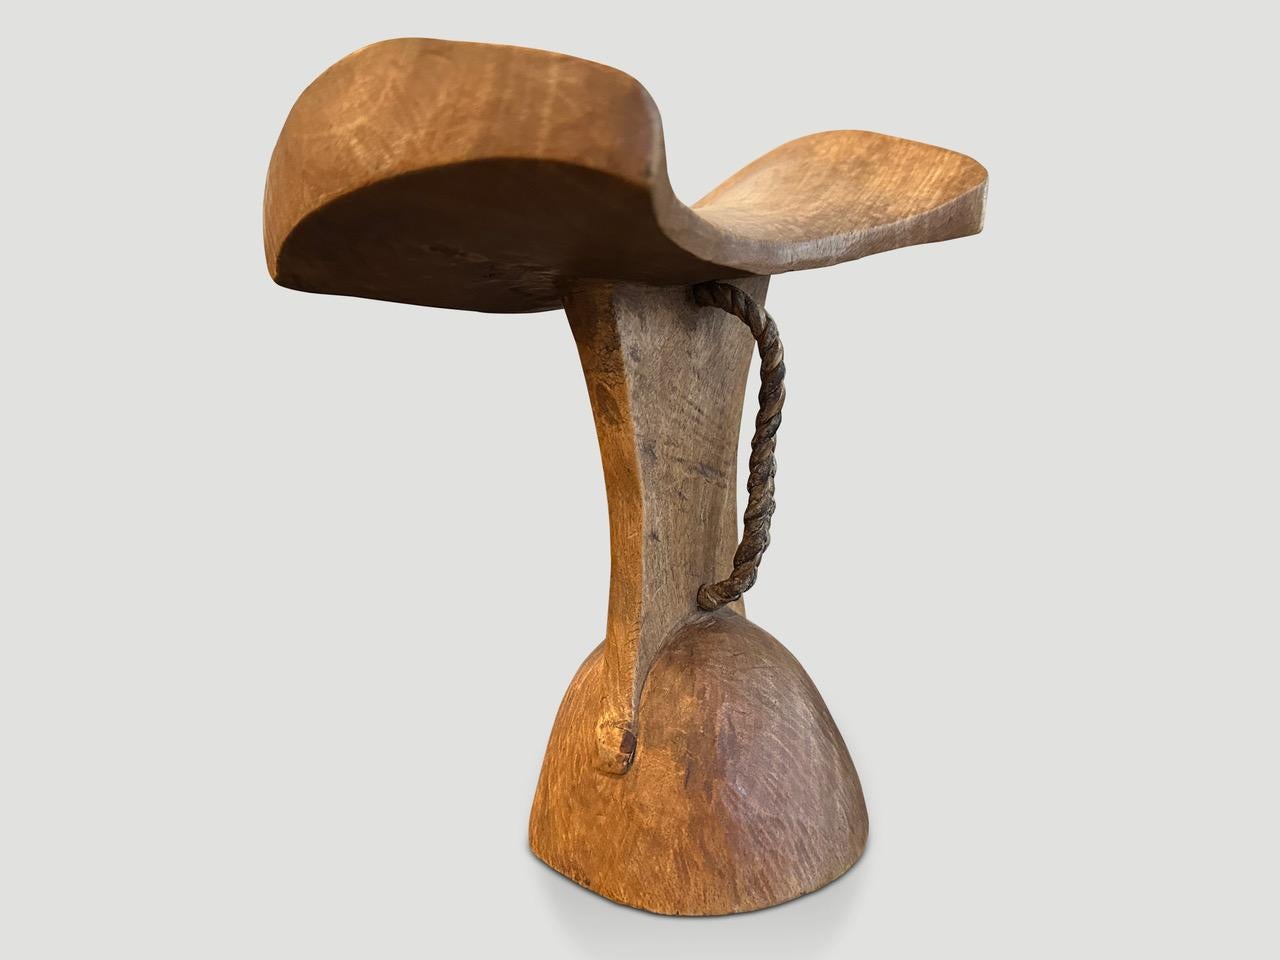 A beautiful hand carved African headrest with lovely patina. Circa 1950. We only select the best.

Own an Andrianna Shamaris original.

Andrianna Shamaris. The Leader In Modern Organic Design. 